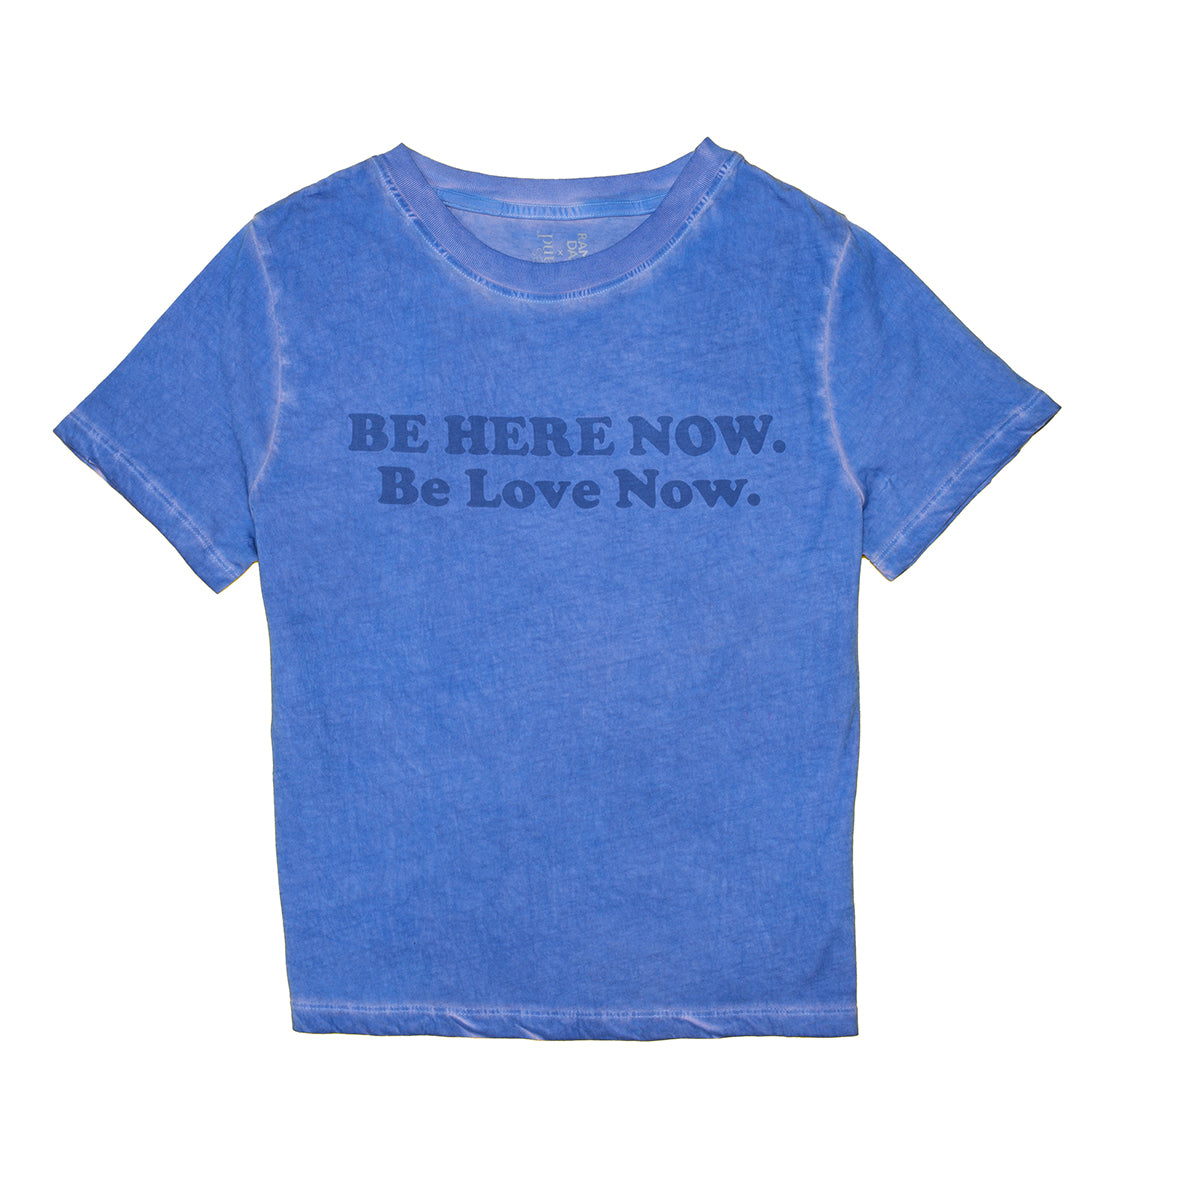 Be Here Now Be Love Now Organic Cotton Tee (Women's)